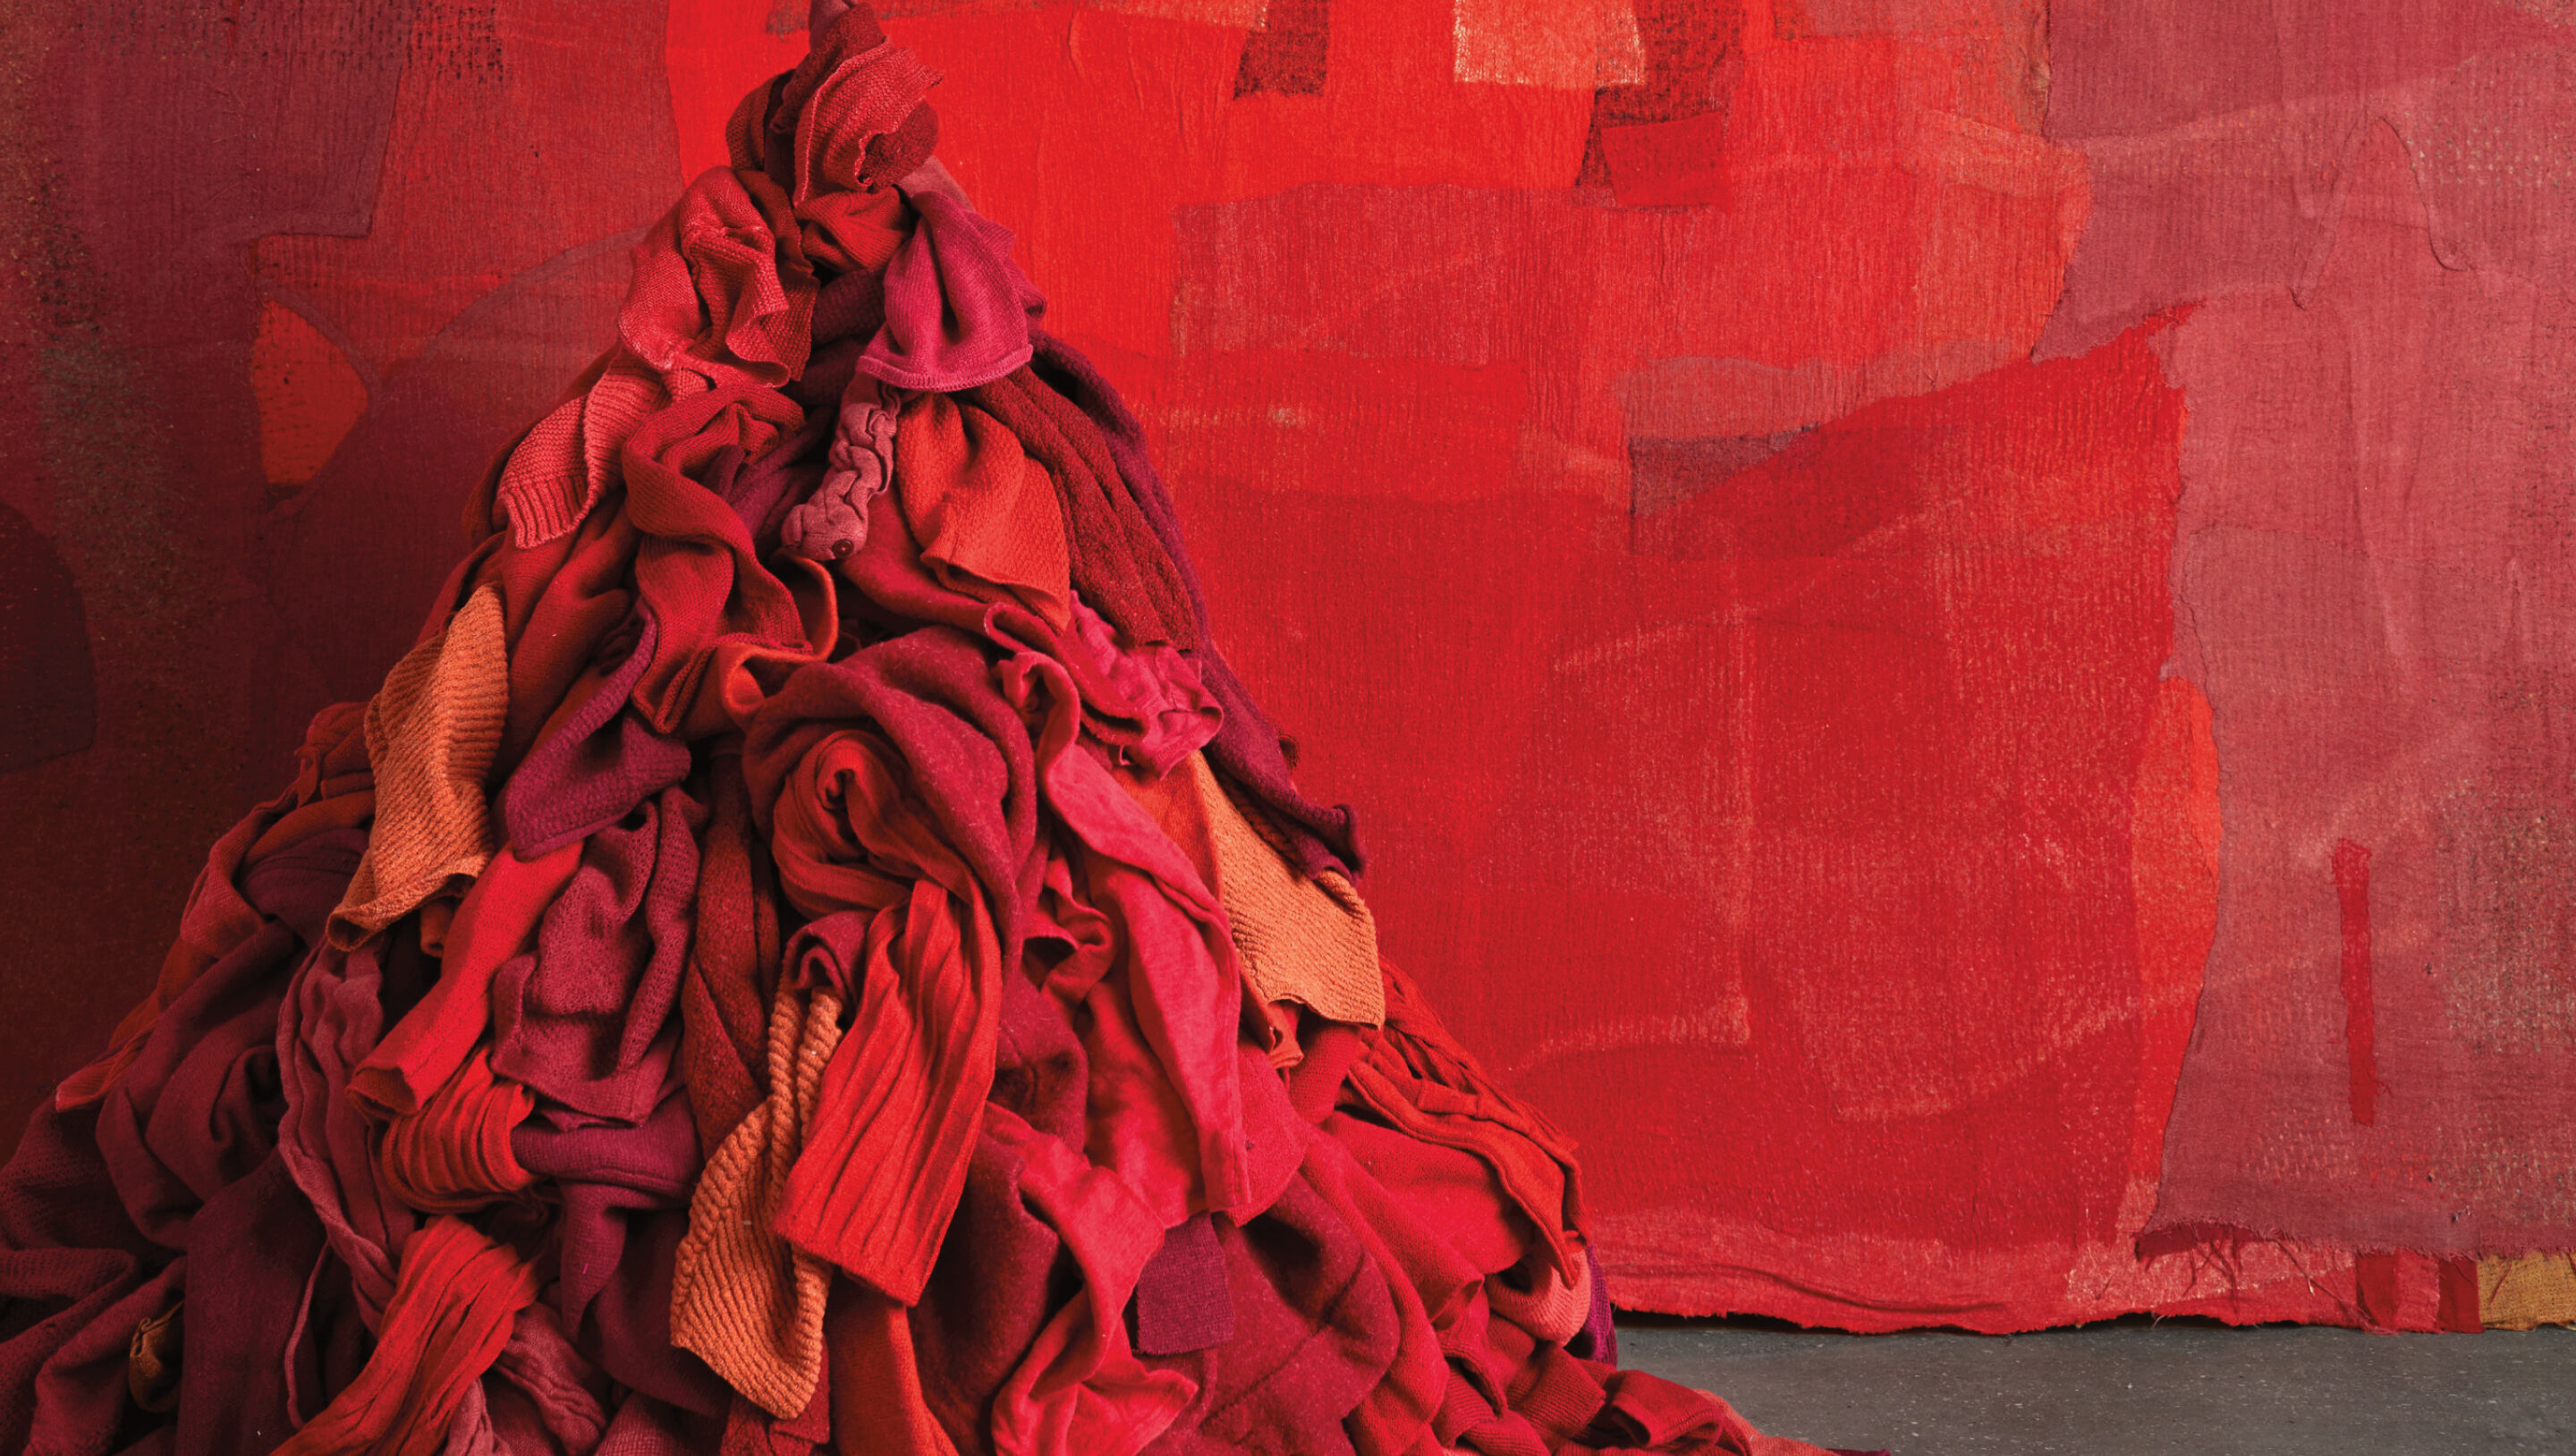 Red pile of EILEEN FISHER clothes against artful red backdrop. 